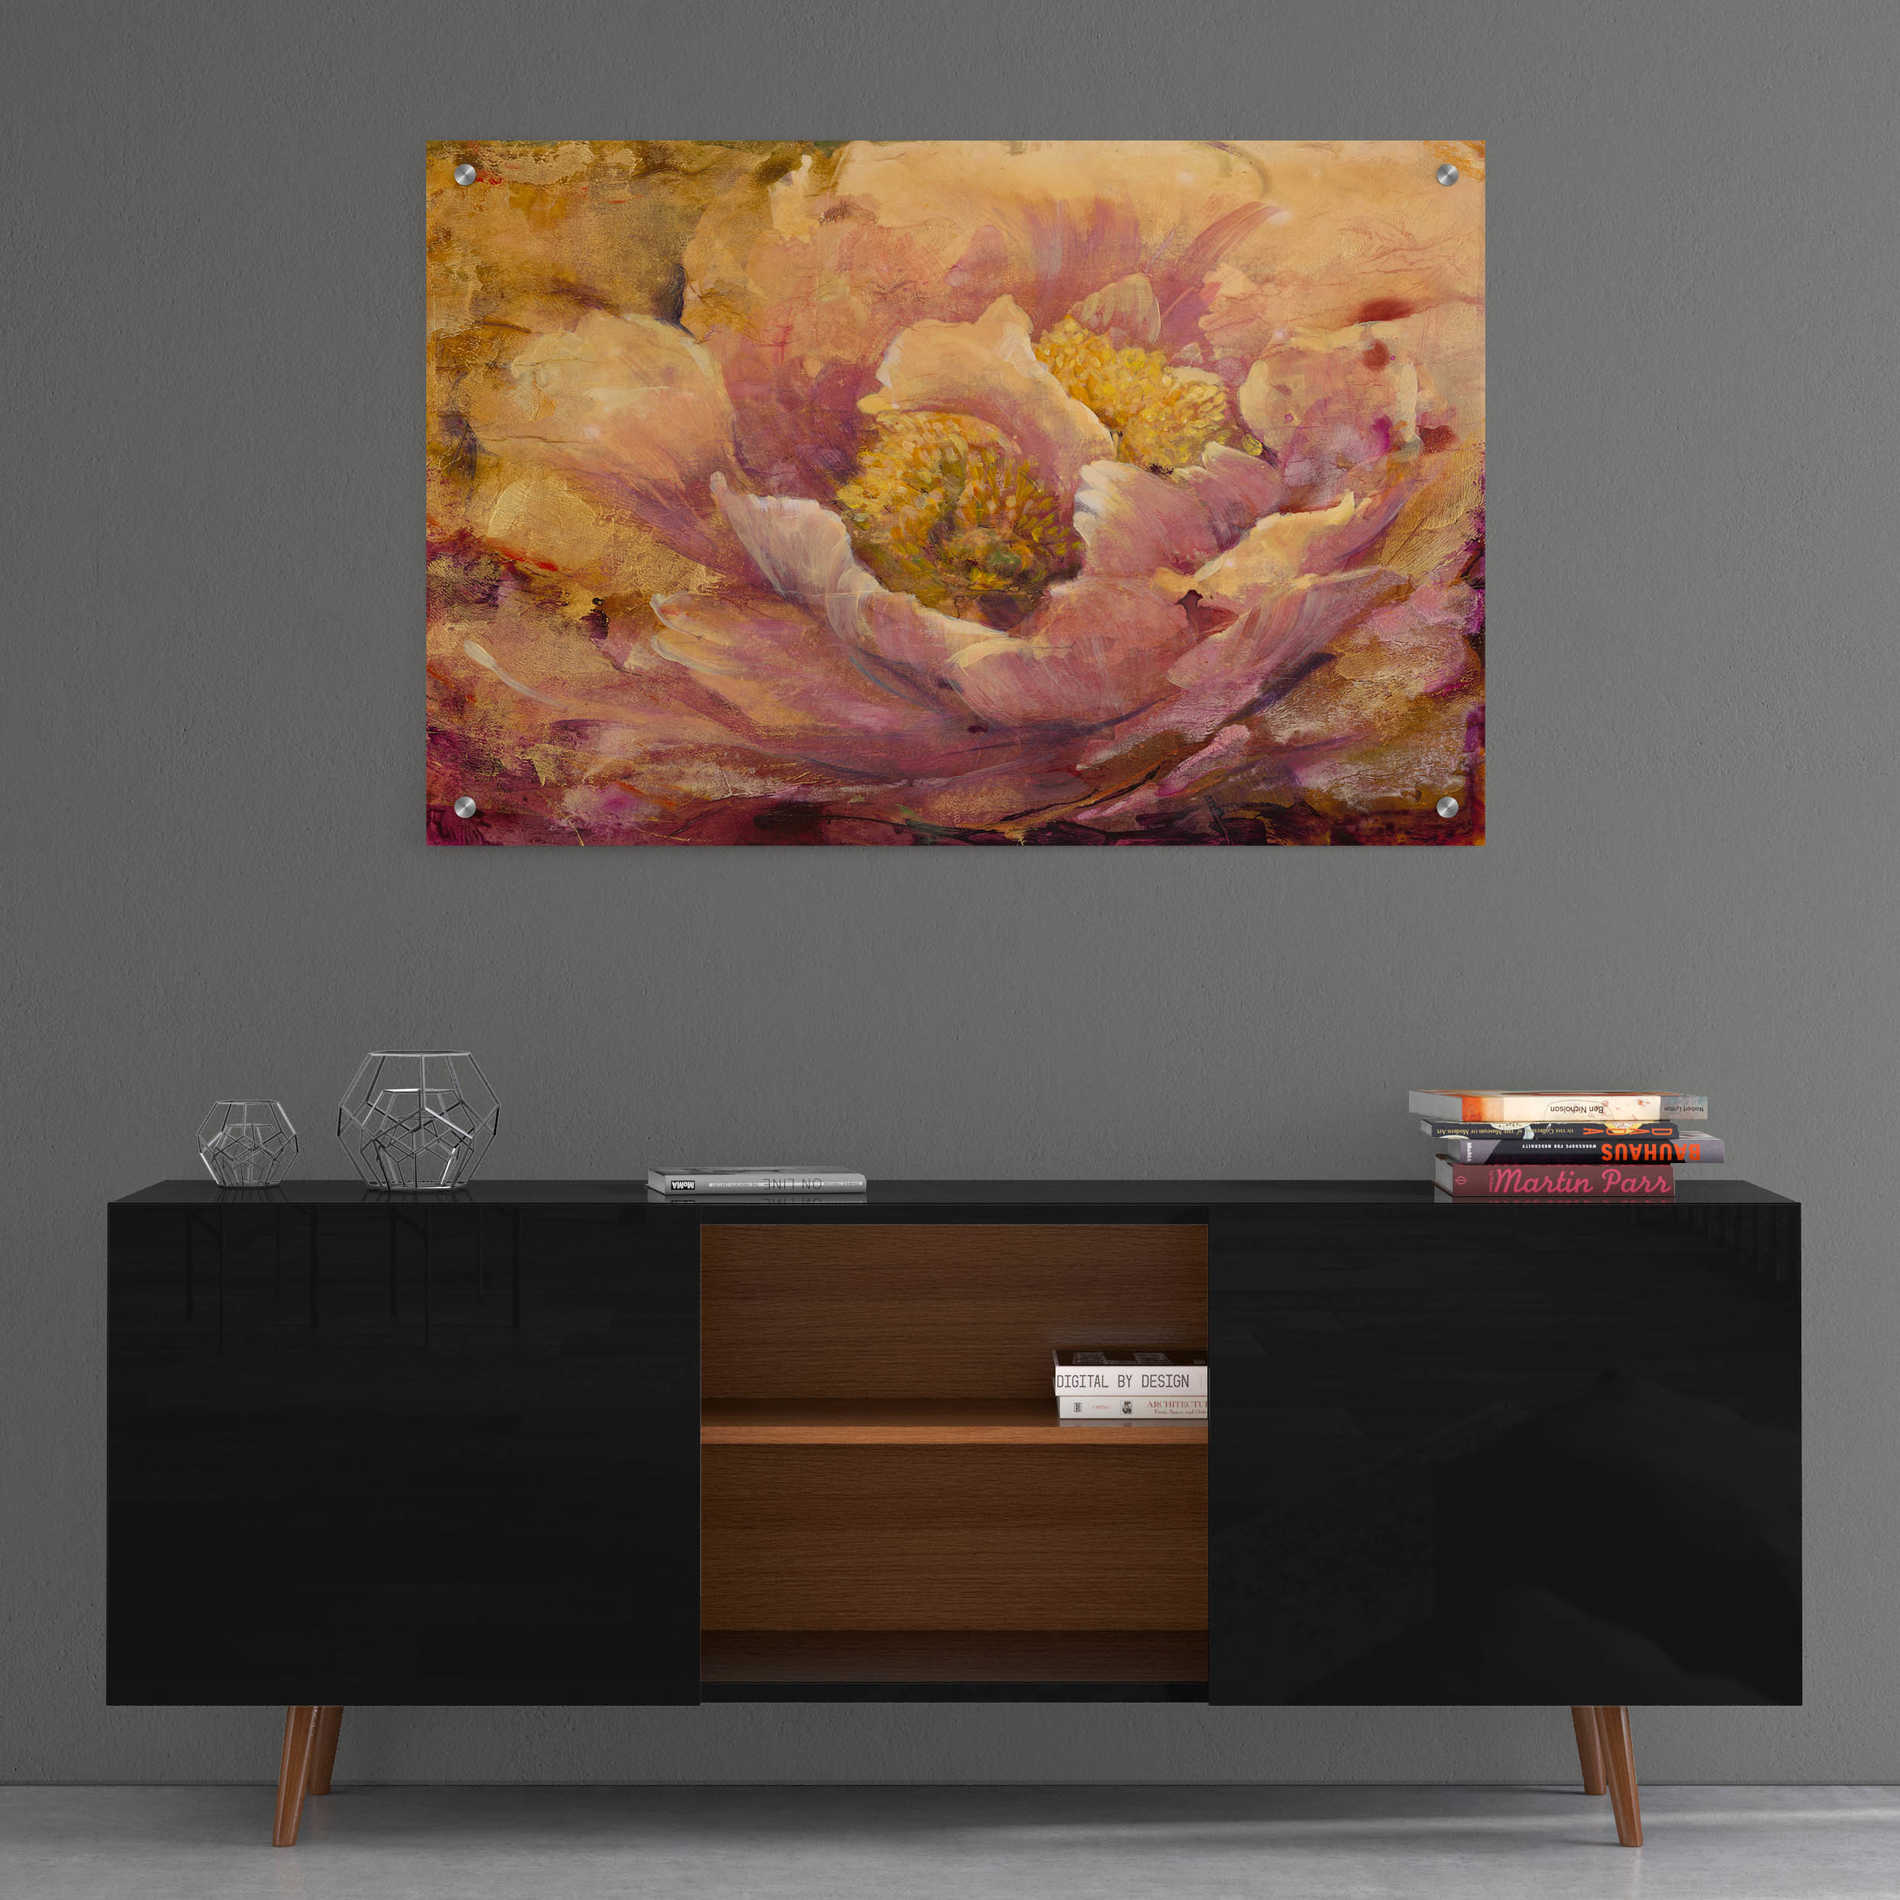 Epic Art 'Floral in Bloom I' by Tim O'Toole, Acrylic Glass Wall Art,36x24